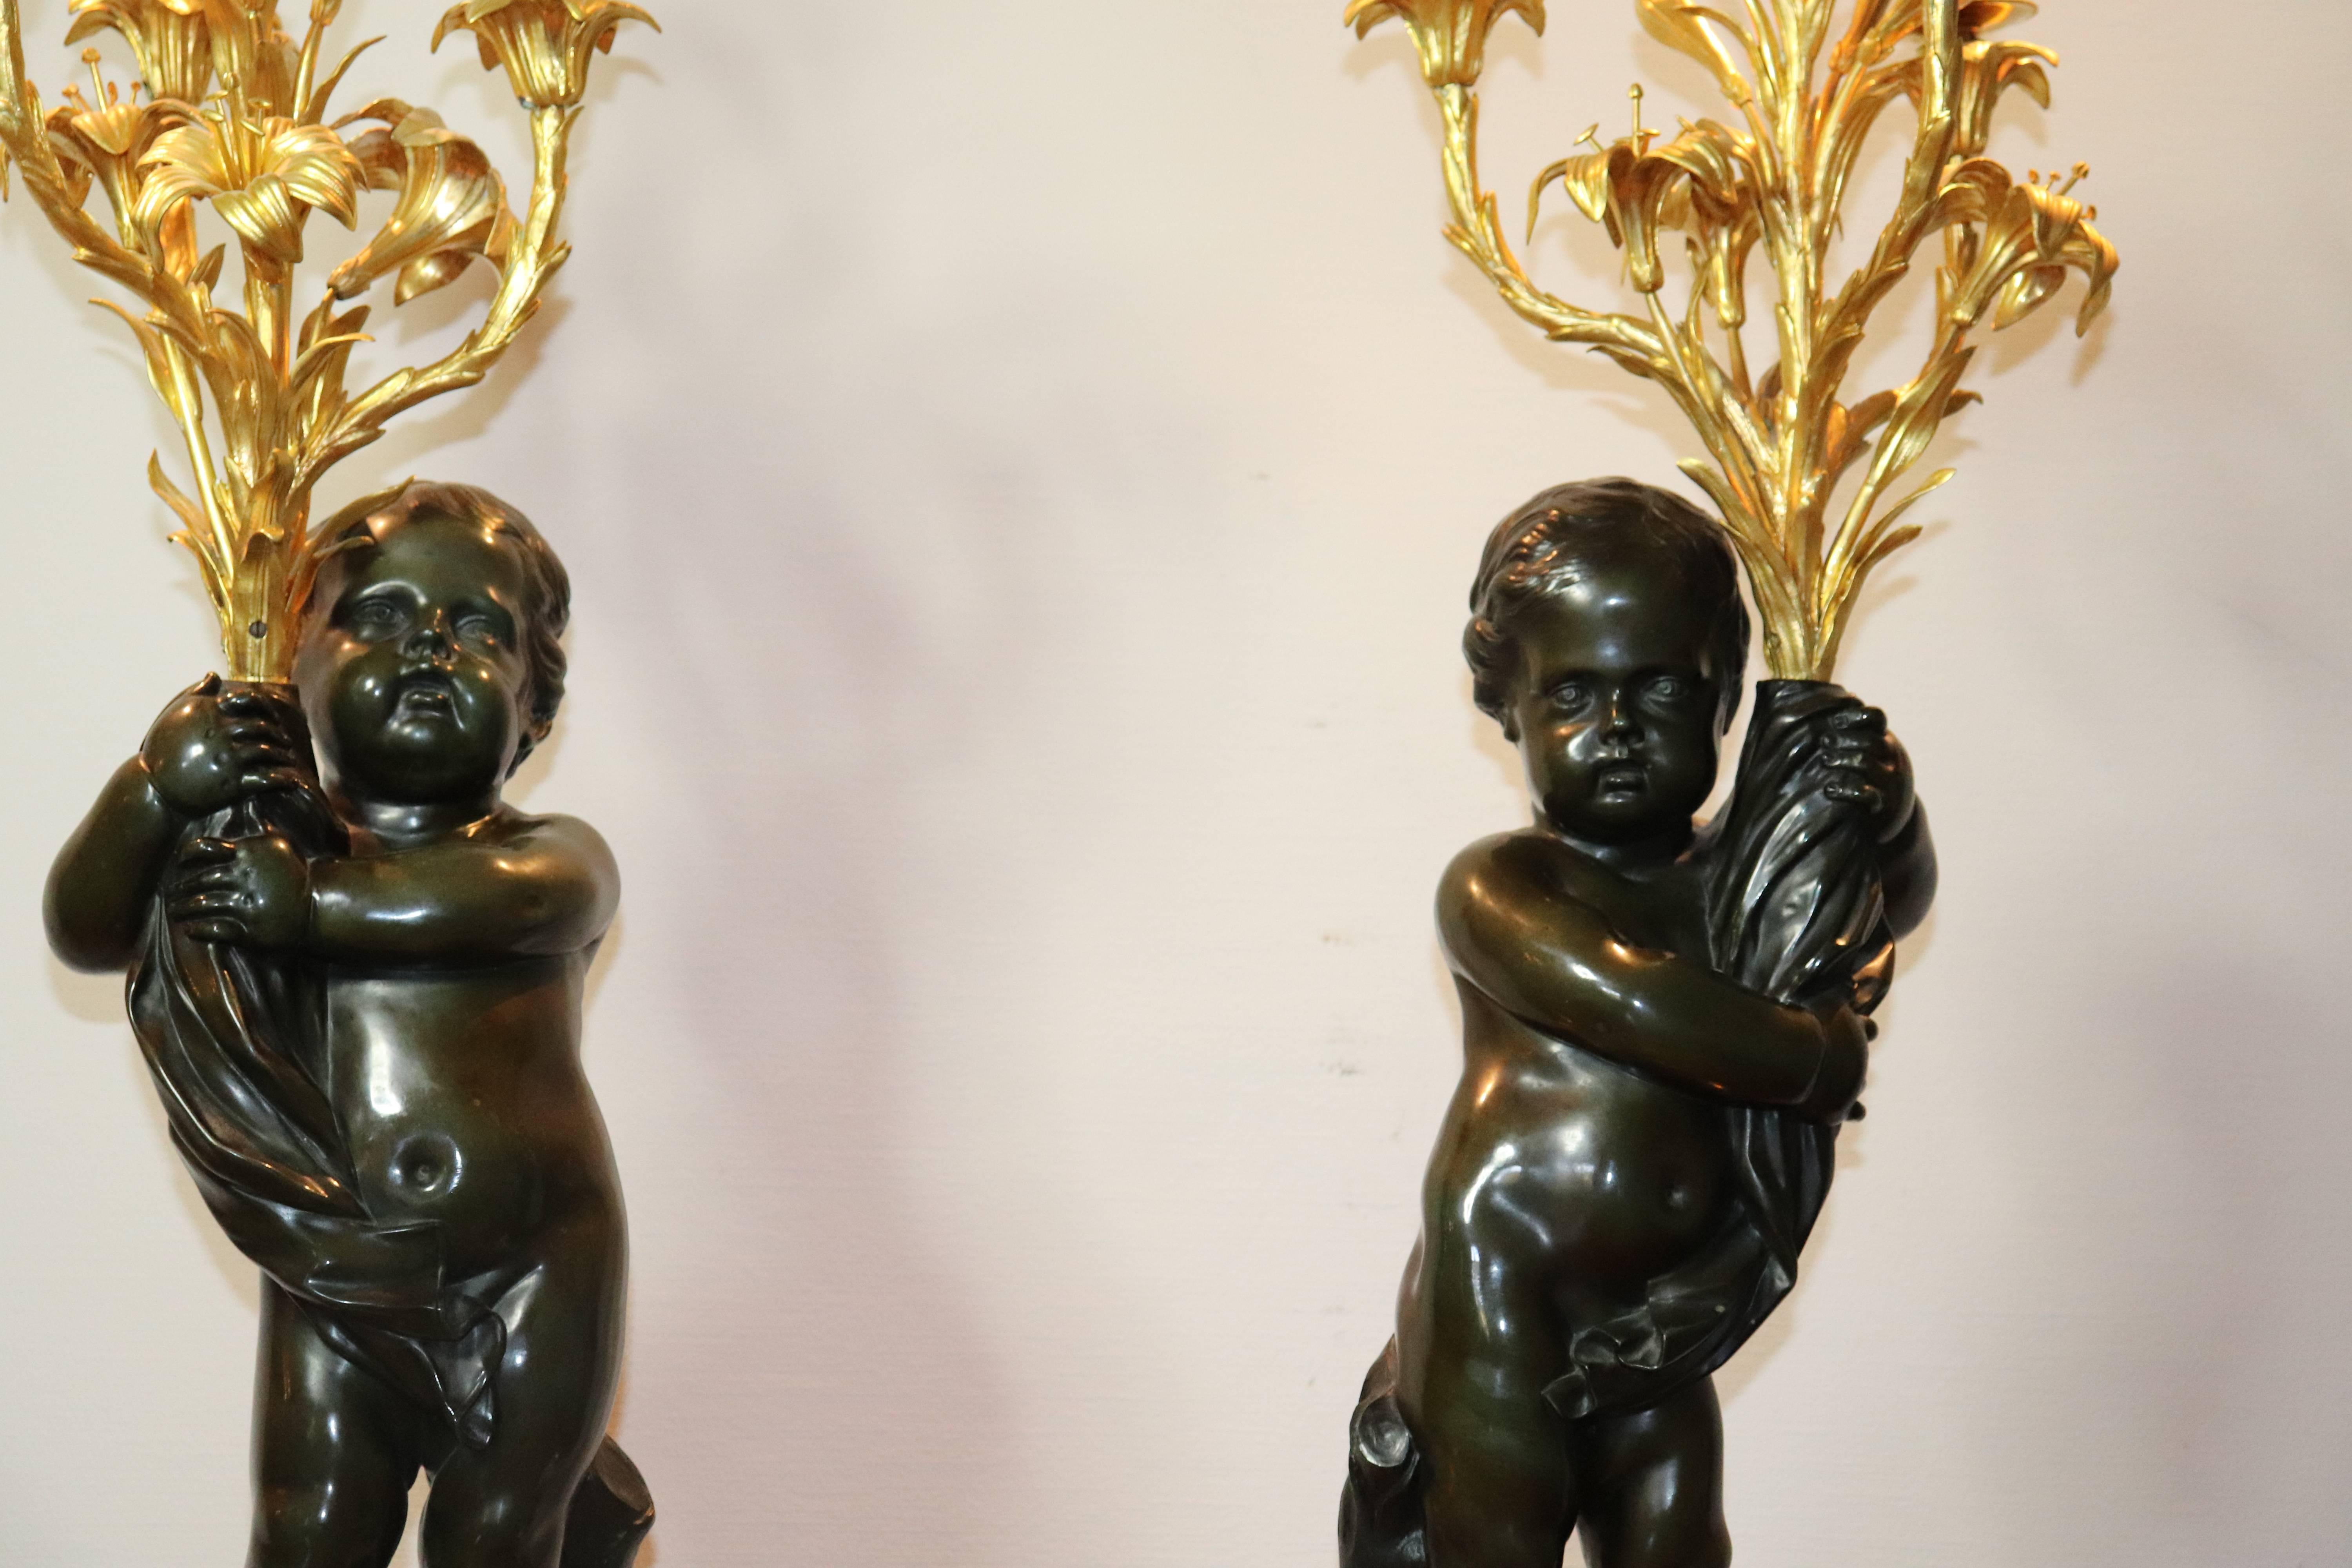 pair of Large French Louis XVI gilt and patinated bronze candelabra attributed to Claude Michel Clodion (1738-1814)
depicting Putto Figures holding arms with four candleholders on each, measure: 109 cm height.